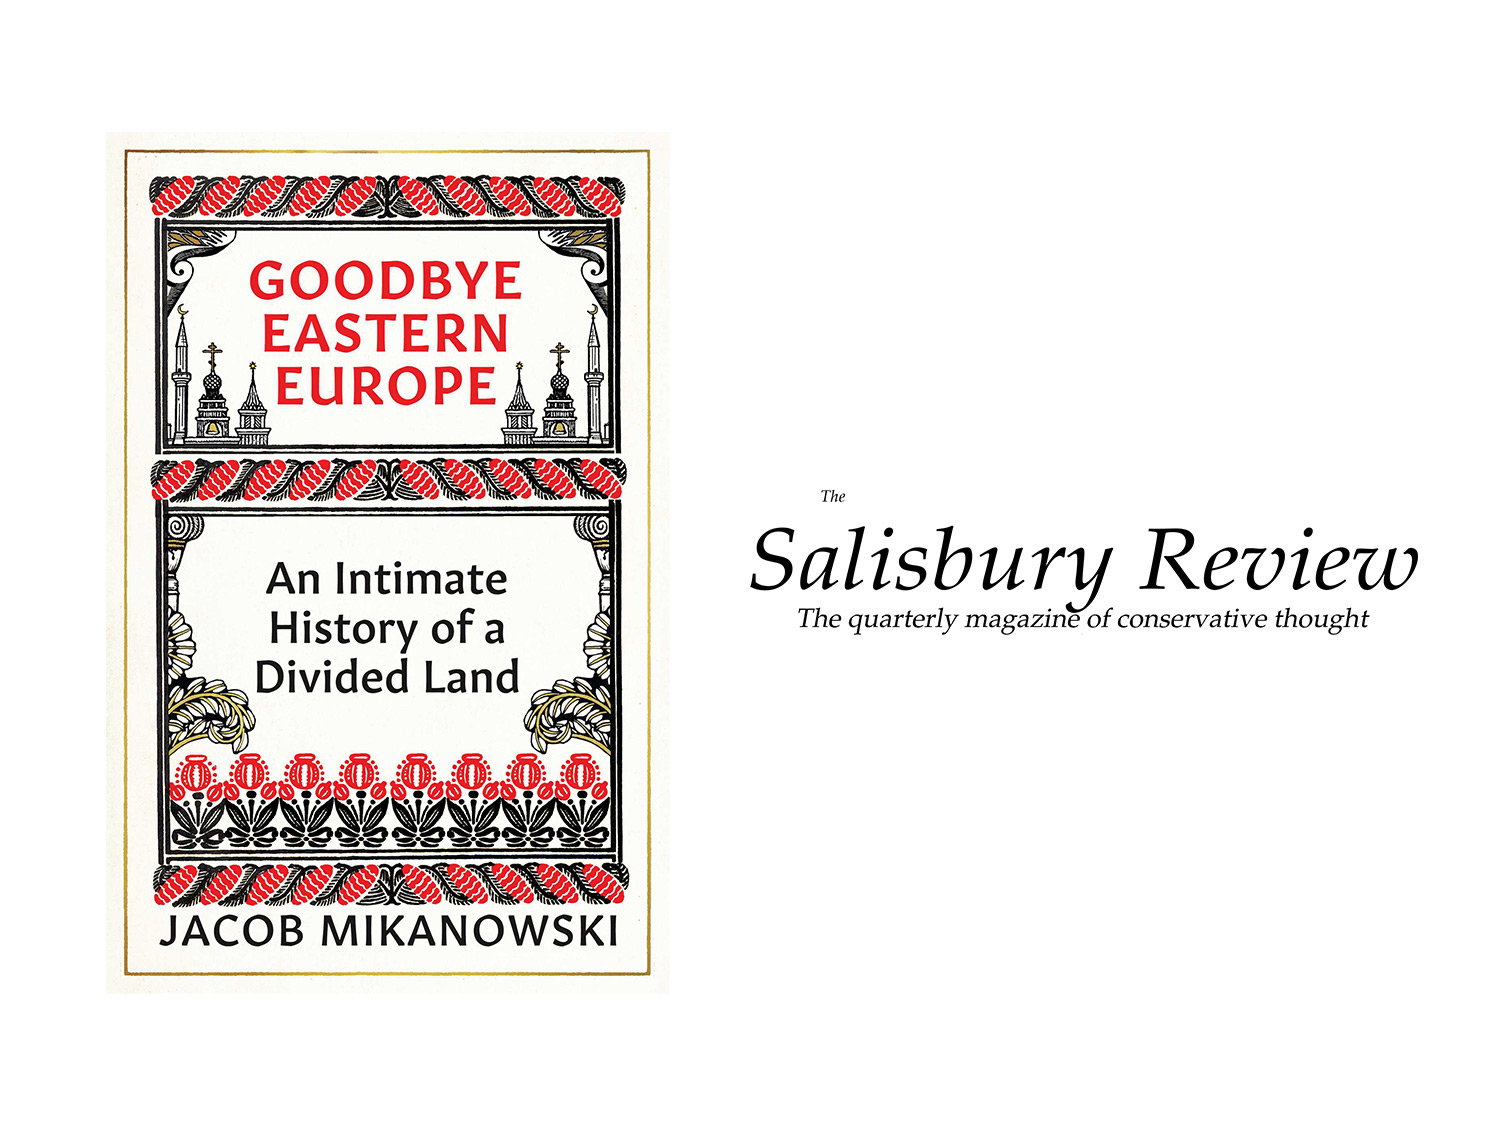 goodbay eastern europe book review